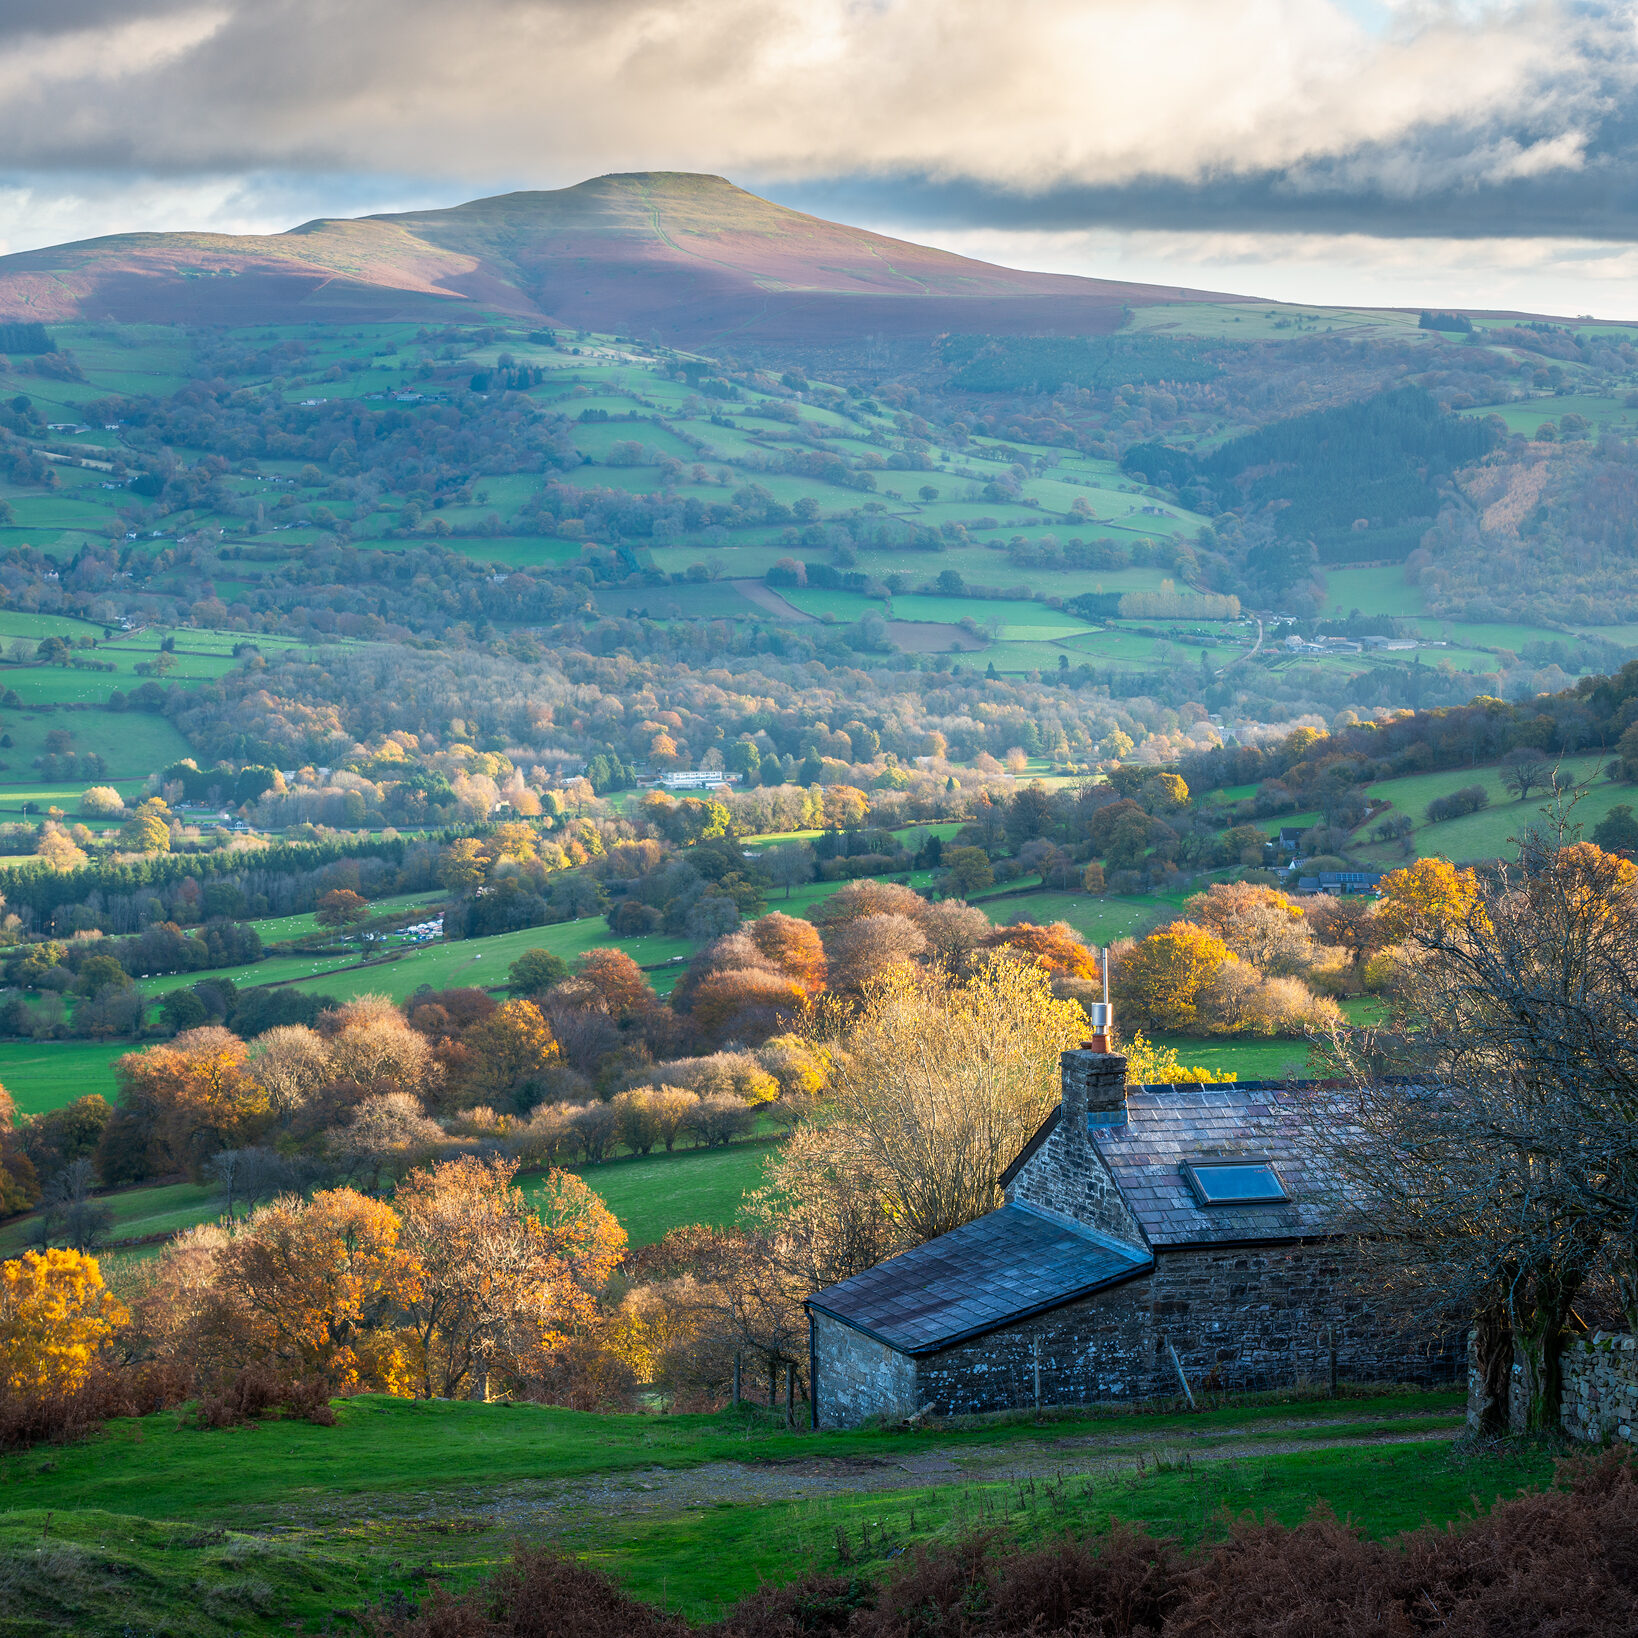 The rising sun sets the autumn landscape of the Brecon Beacons aglow, as well as the cozy town of Crickhowell below Sugar Loaf Mountain.